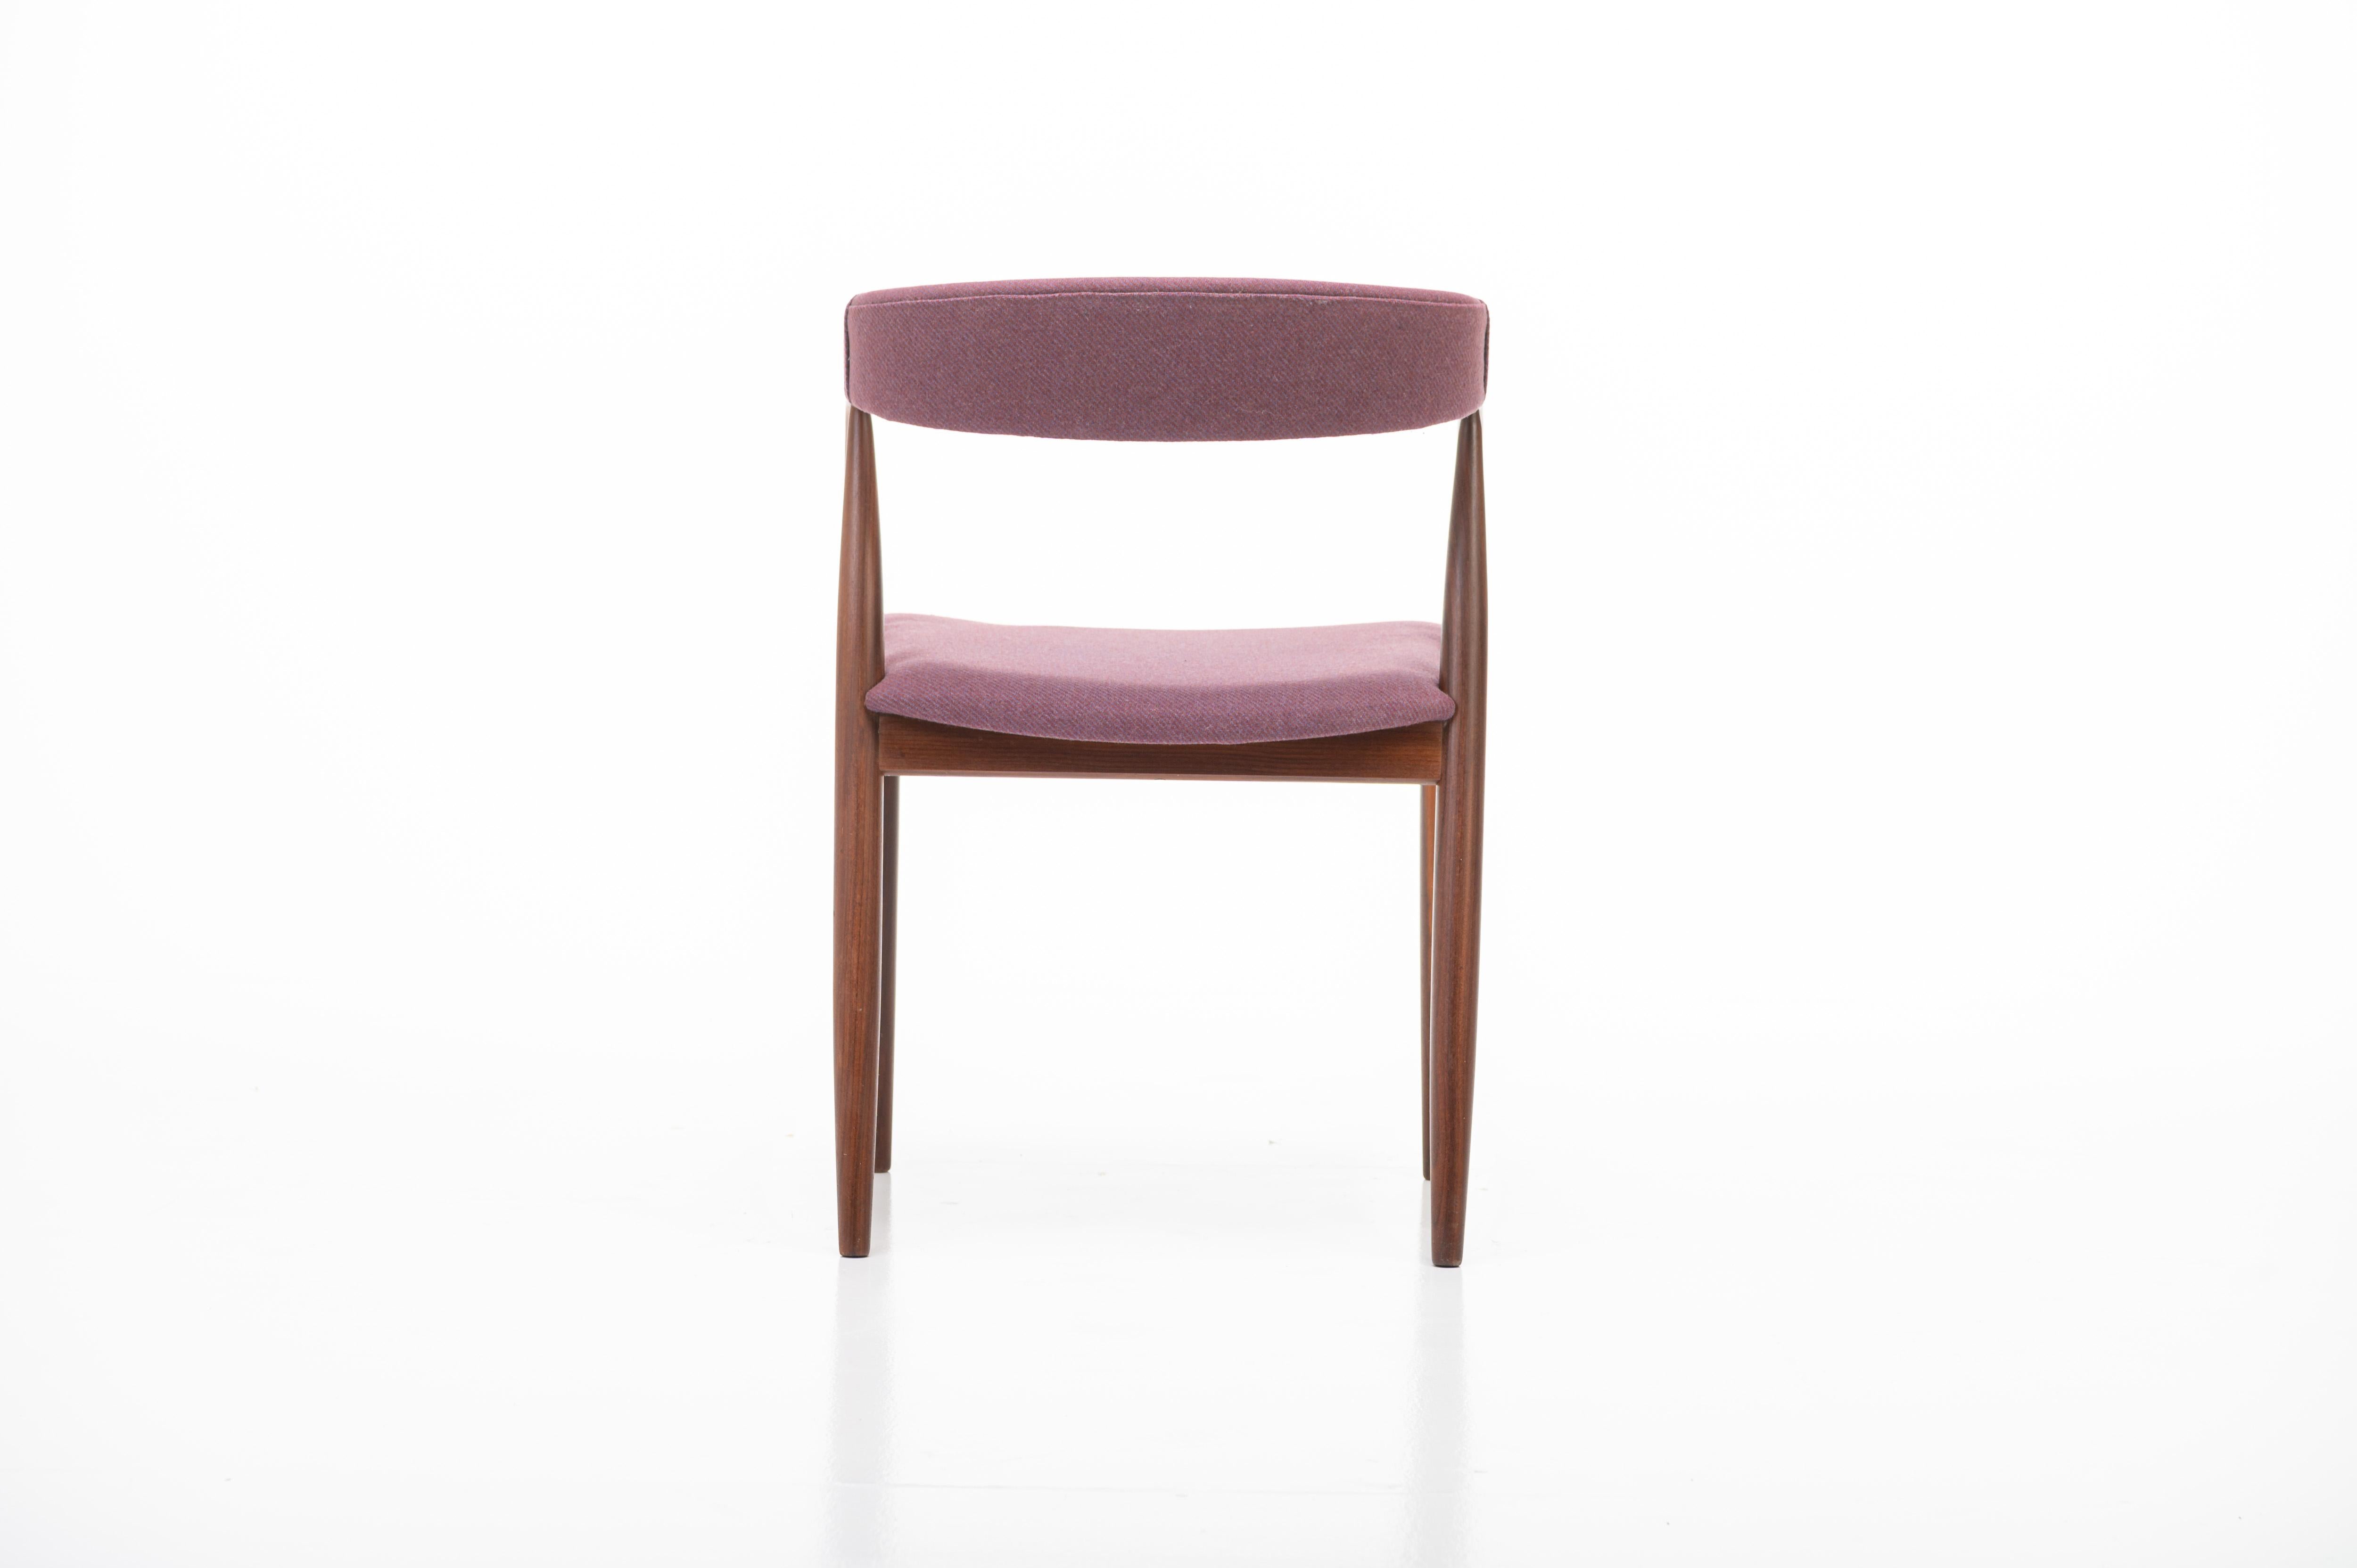 Danish Set of 6 Dining Chairs in Teak and Purple Fabric, Denmark, 1960s